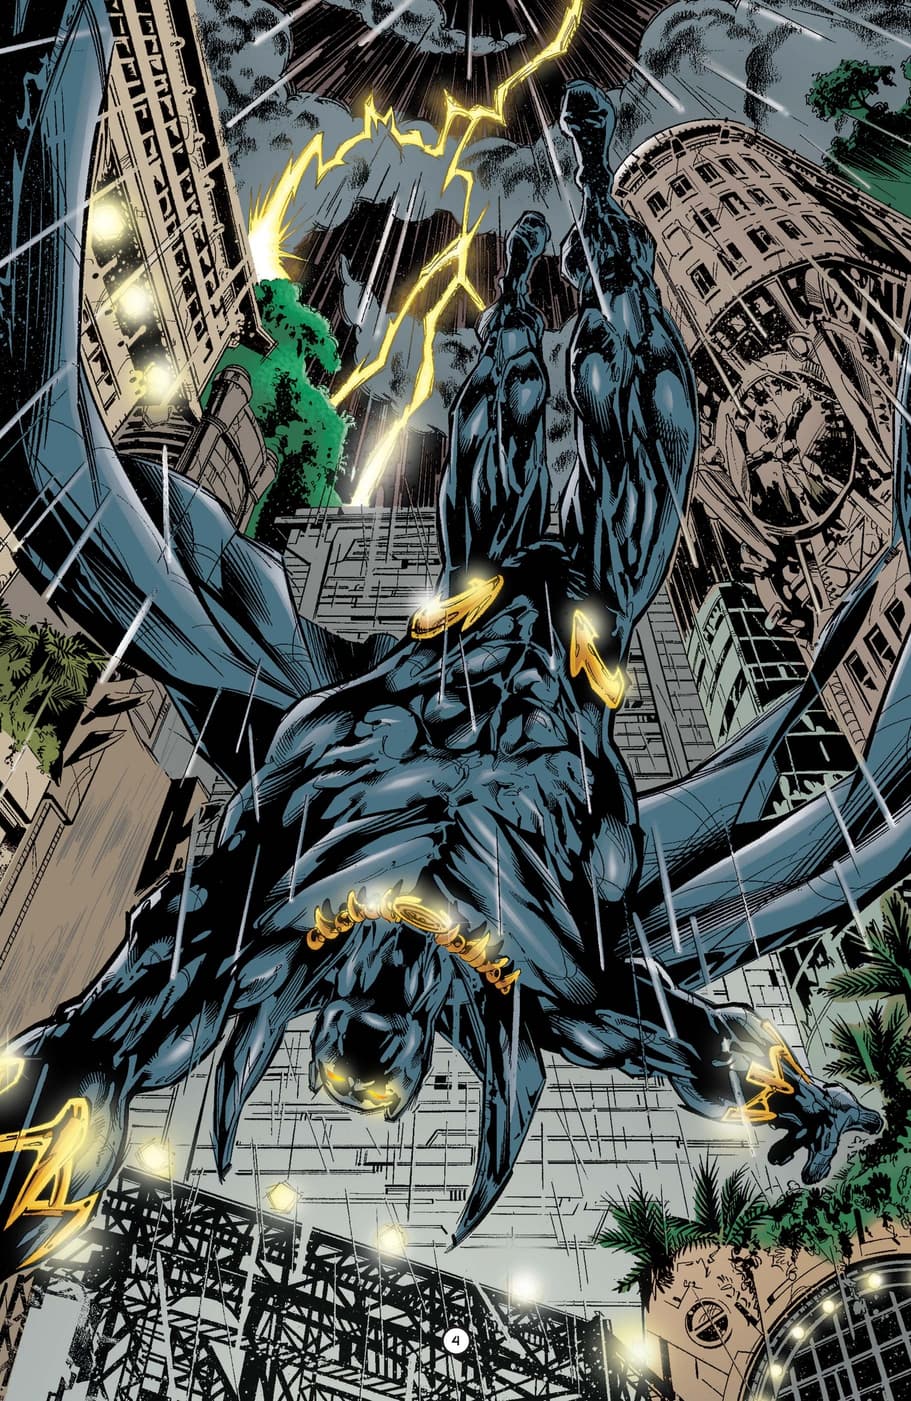 Black Panther dives off a building in BLACK PANTHER (1998) #13.